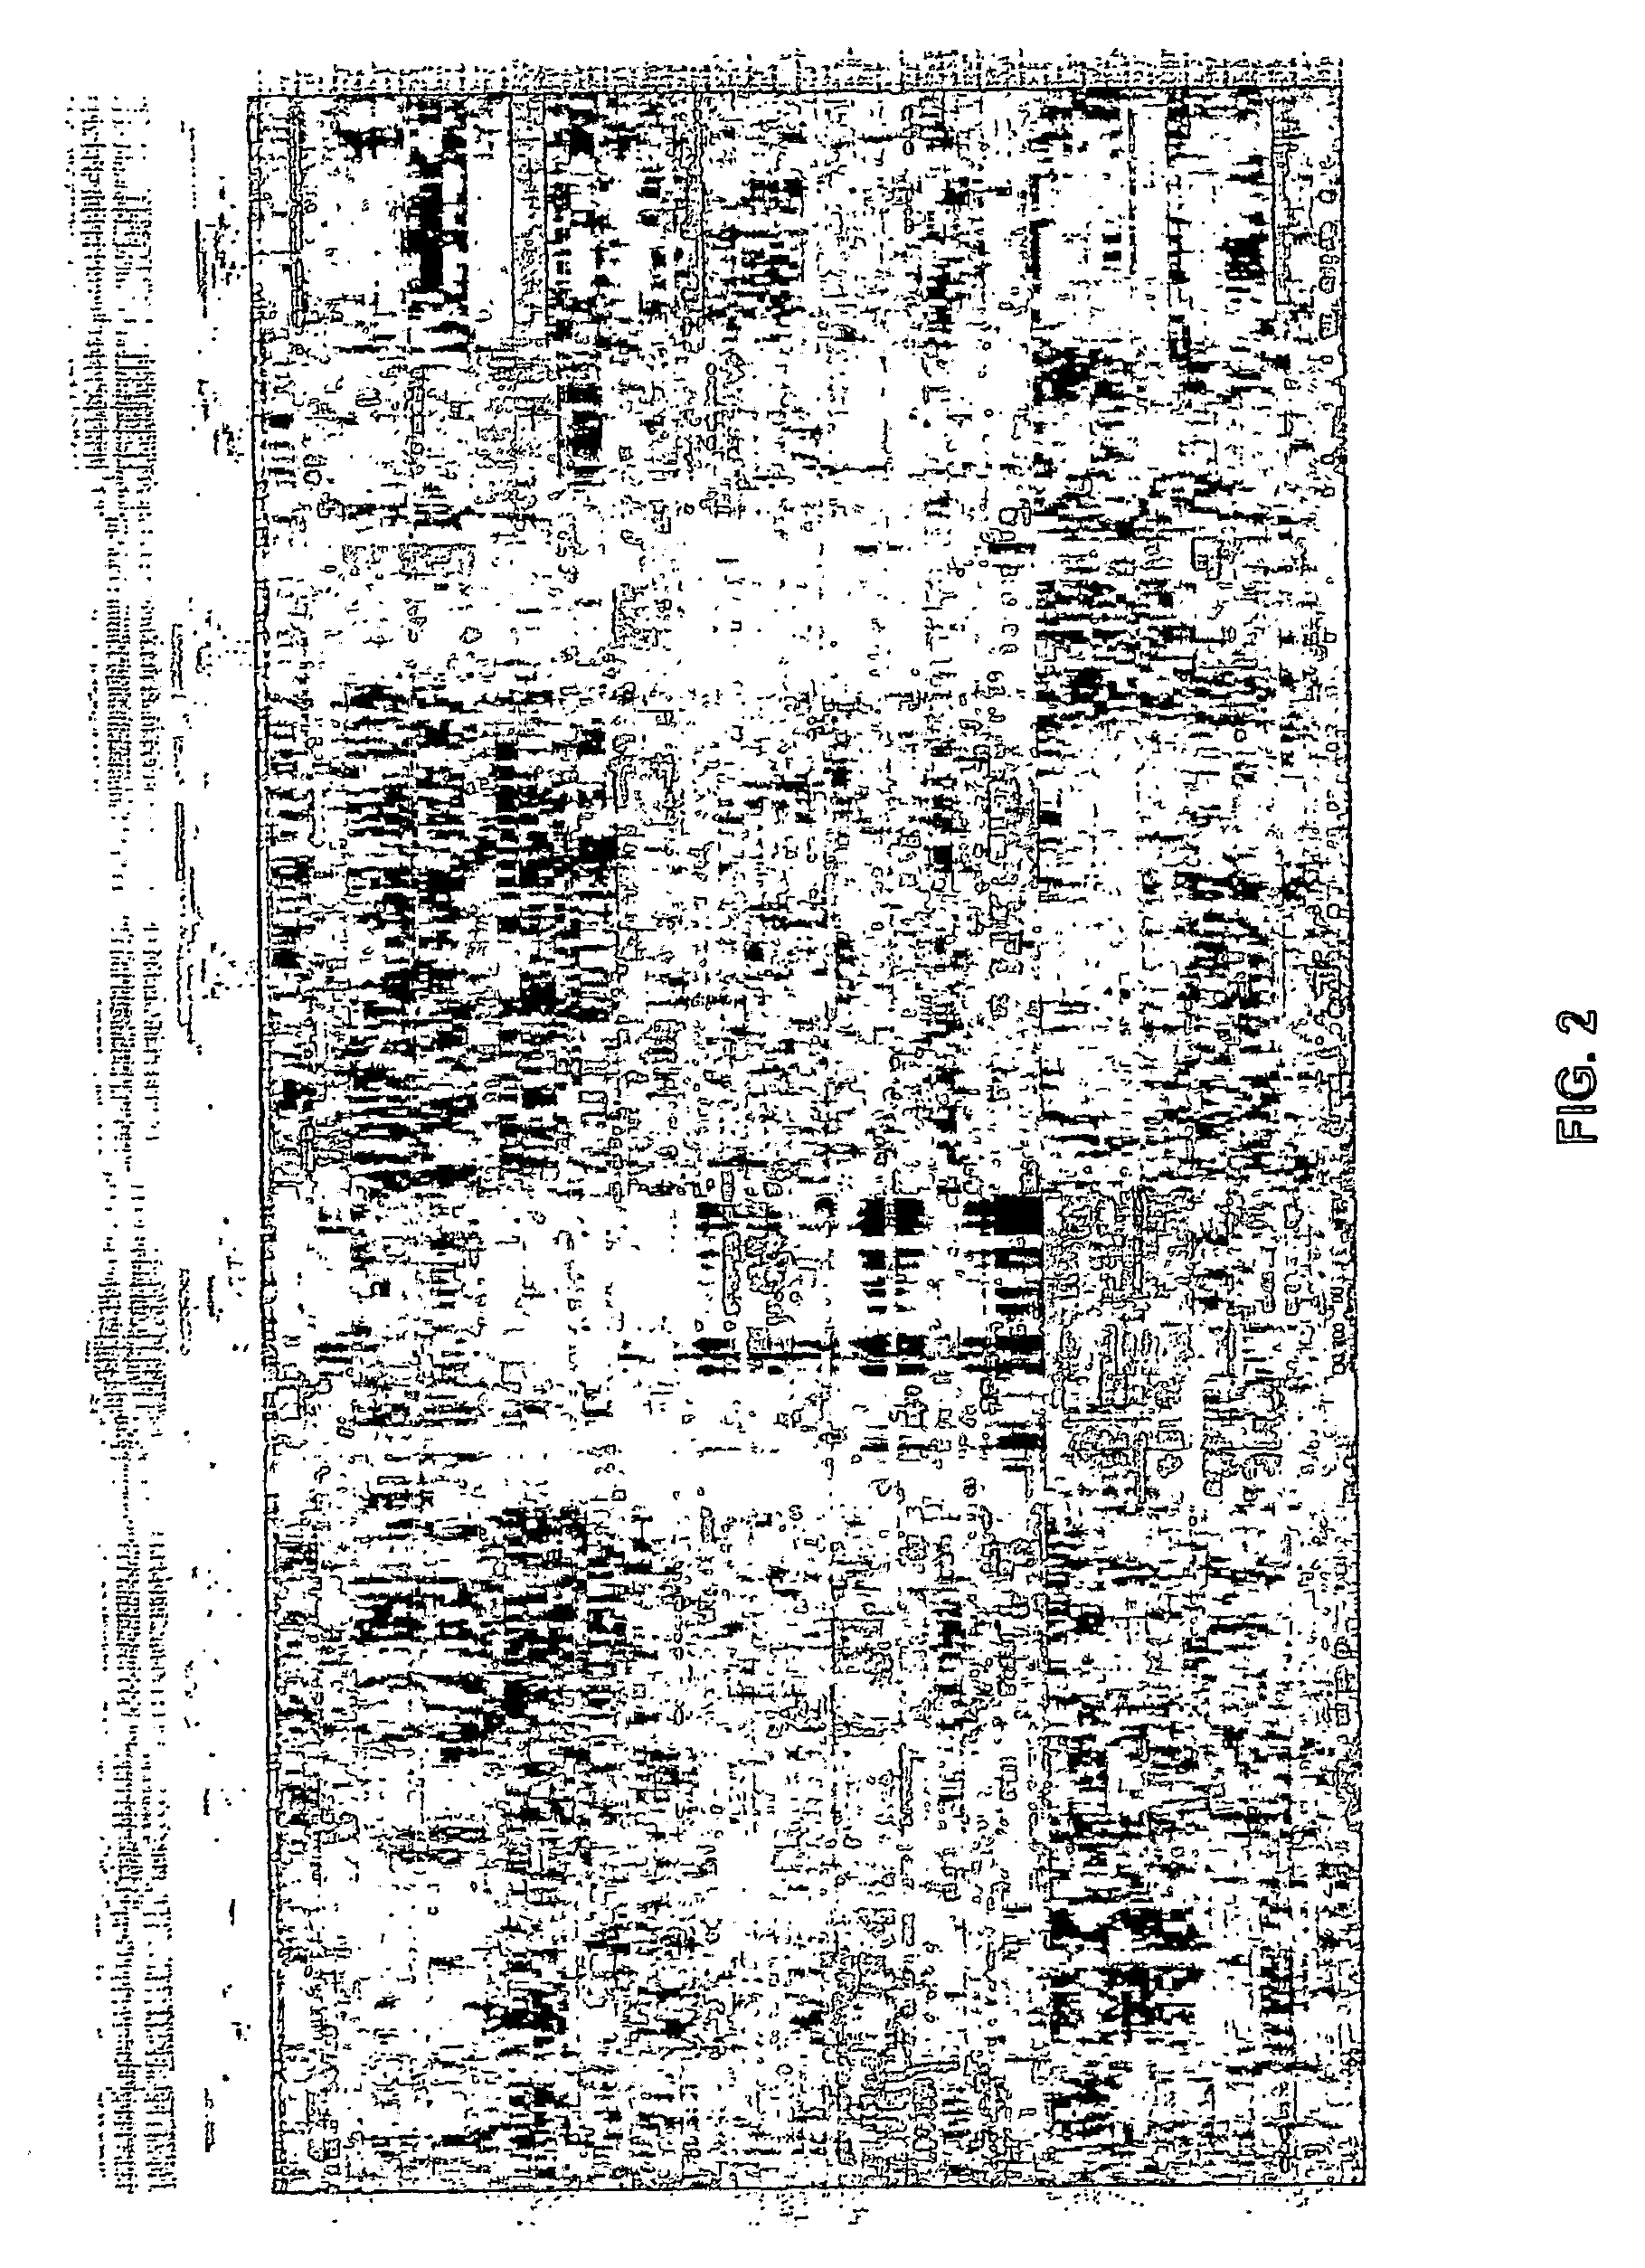 MicroRNA-based methods and compositions for the diagnosis, prognosis and treatment of solid cancers